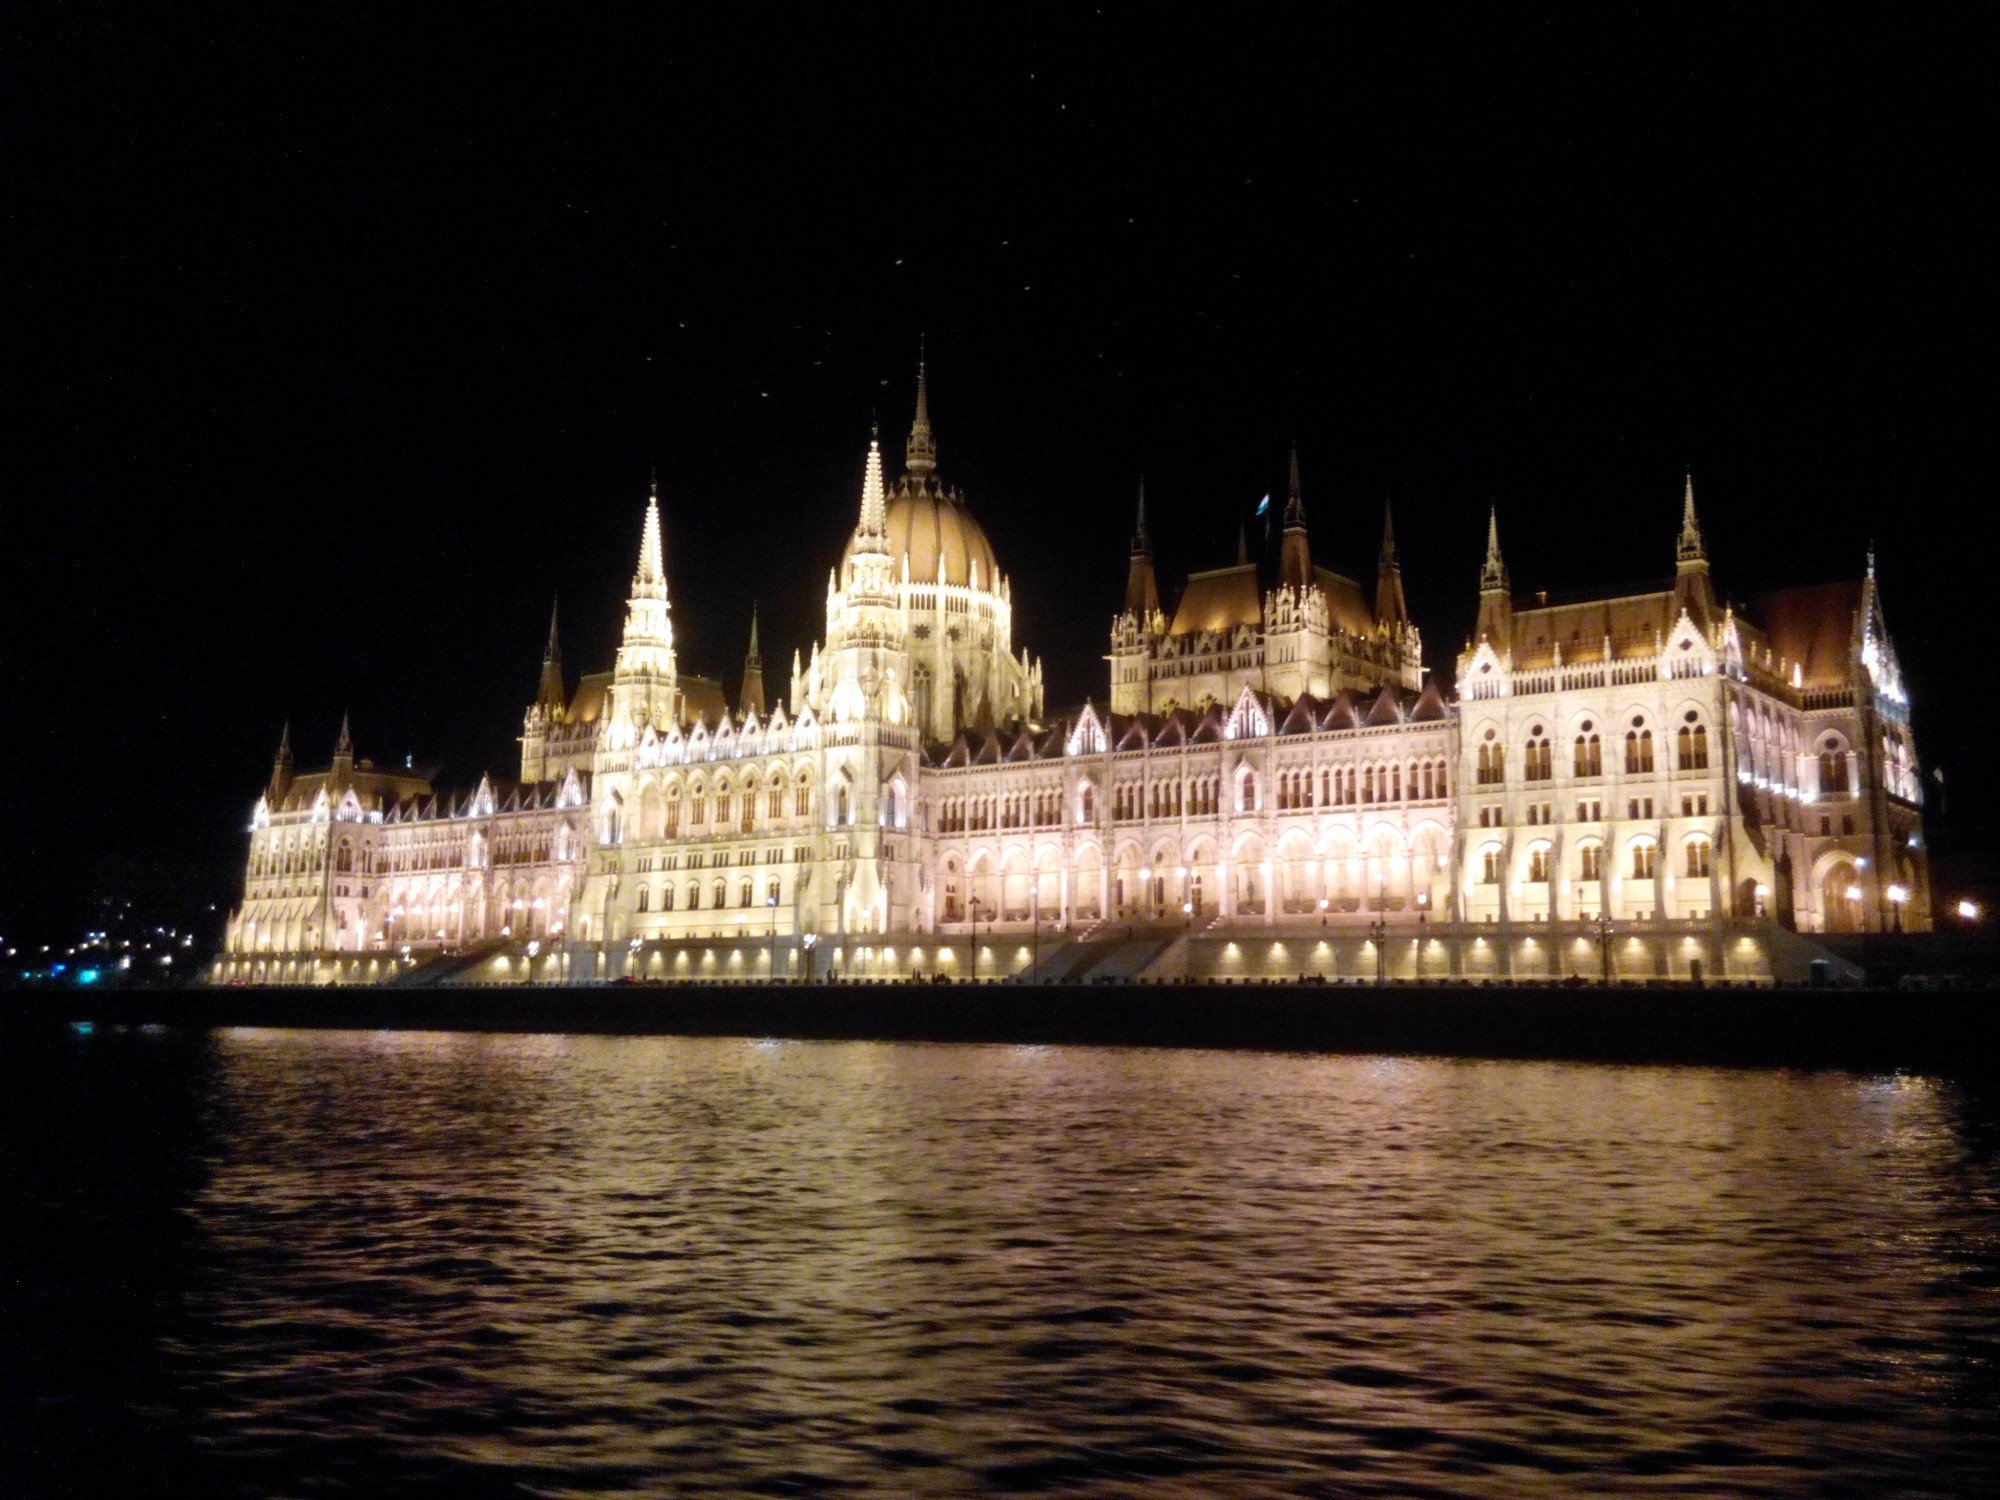 Budapest Parliament from the Danube <br/> <br/>
August 2015